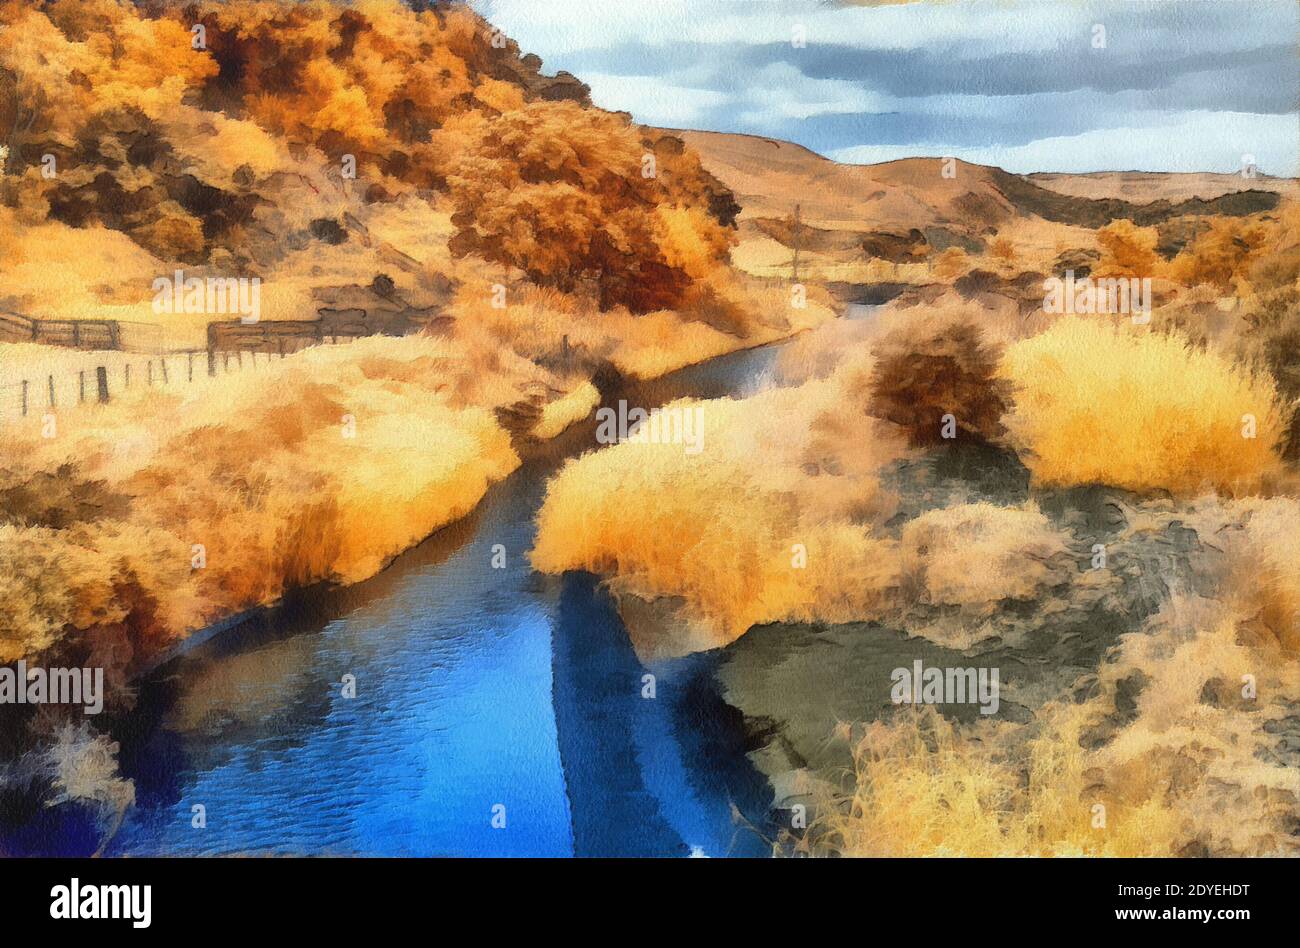 Infrared image of a Blue river through a countryside Stock Photo